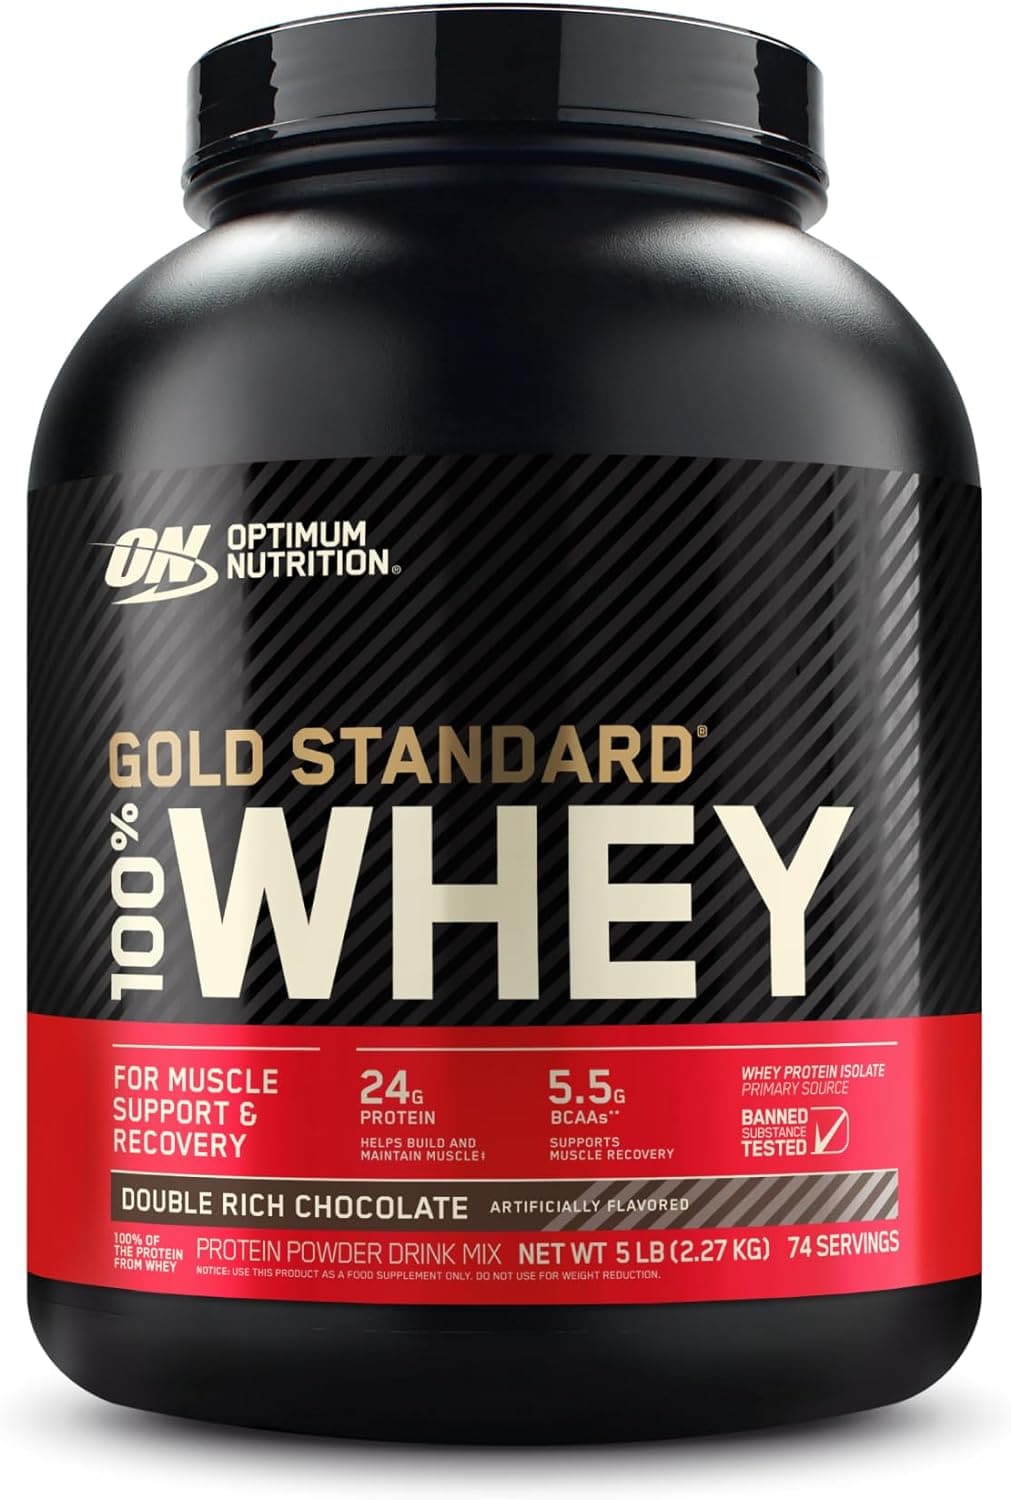 Optimum Nutrition Gold Standard 100% Whey Protein for Post-Workout Muscle Support & Recovery, 5 lbs - 2.27 Kg